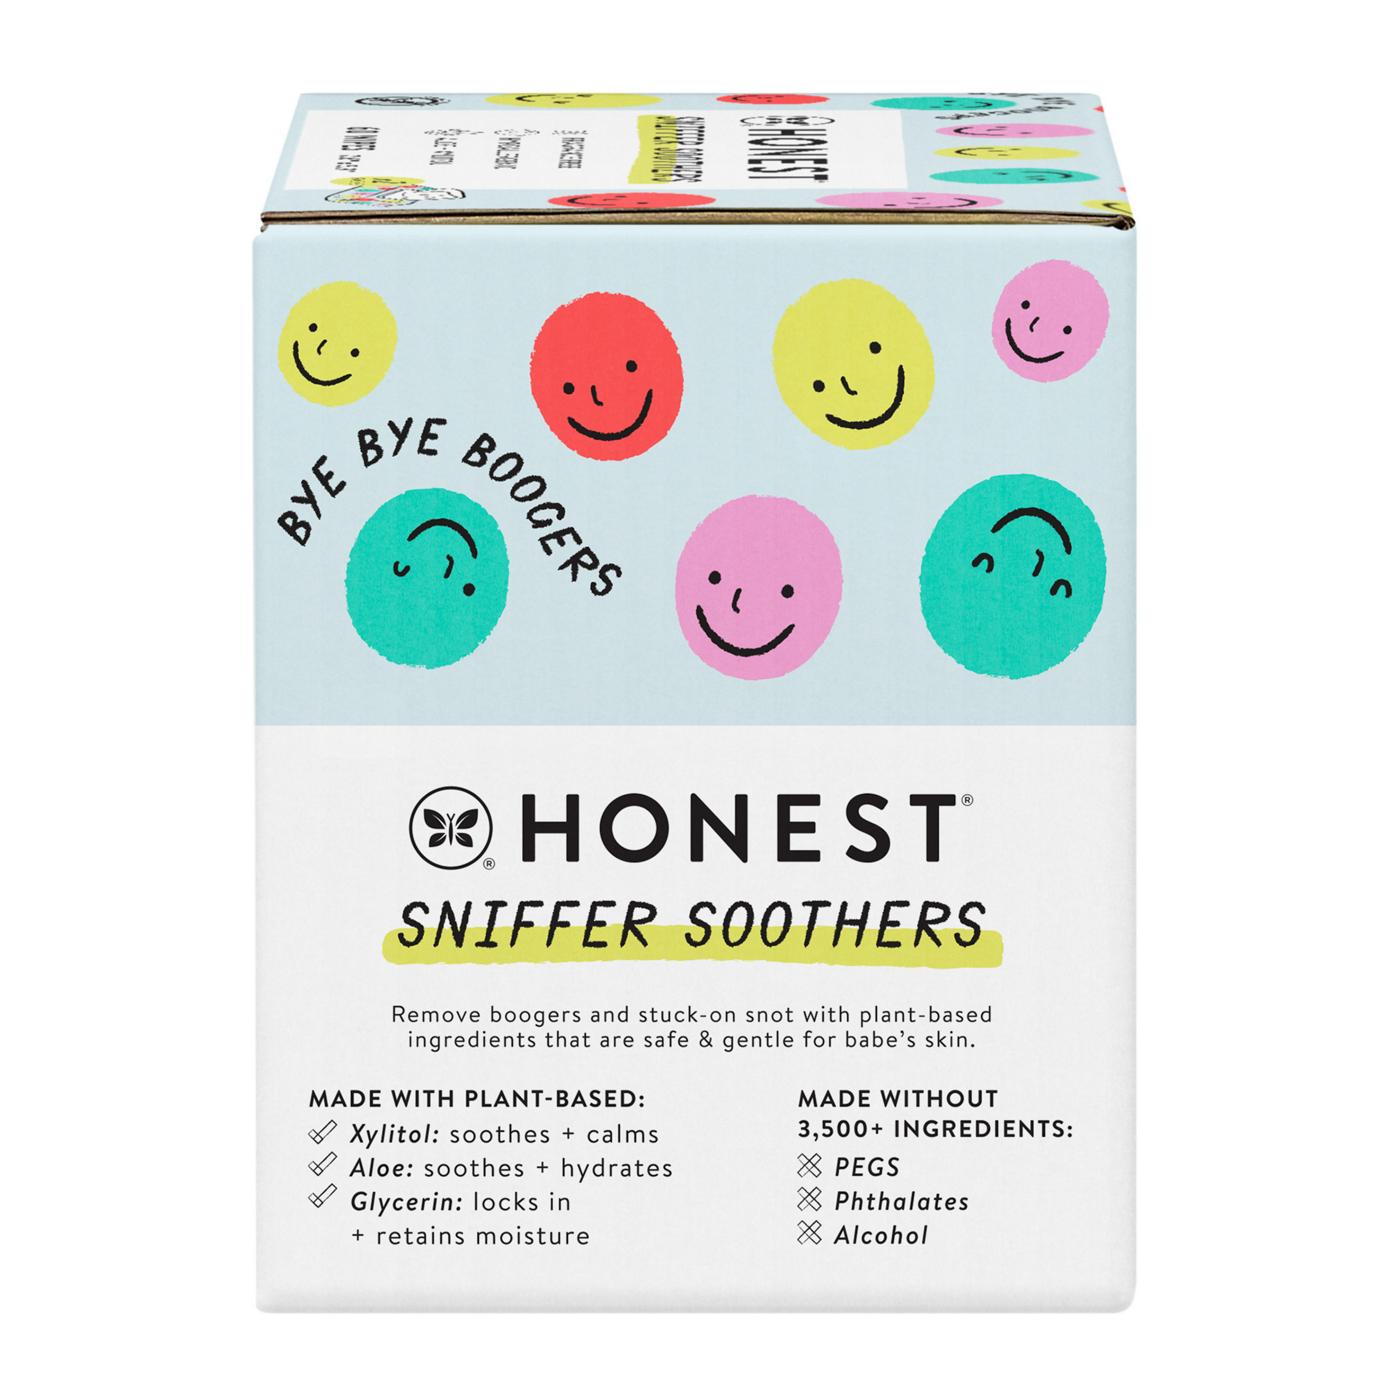 The Honest Company Sniffer Soothers Wipes; image 4 of 5